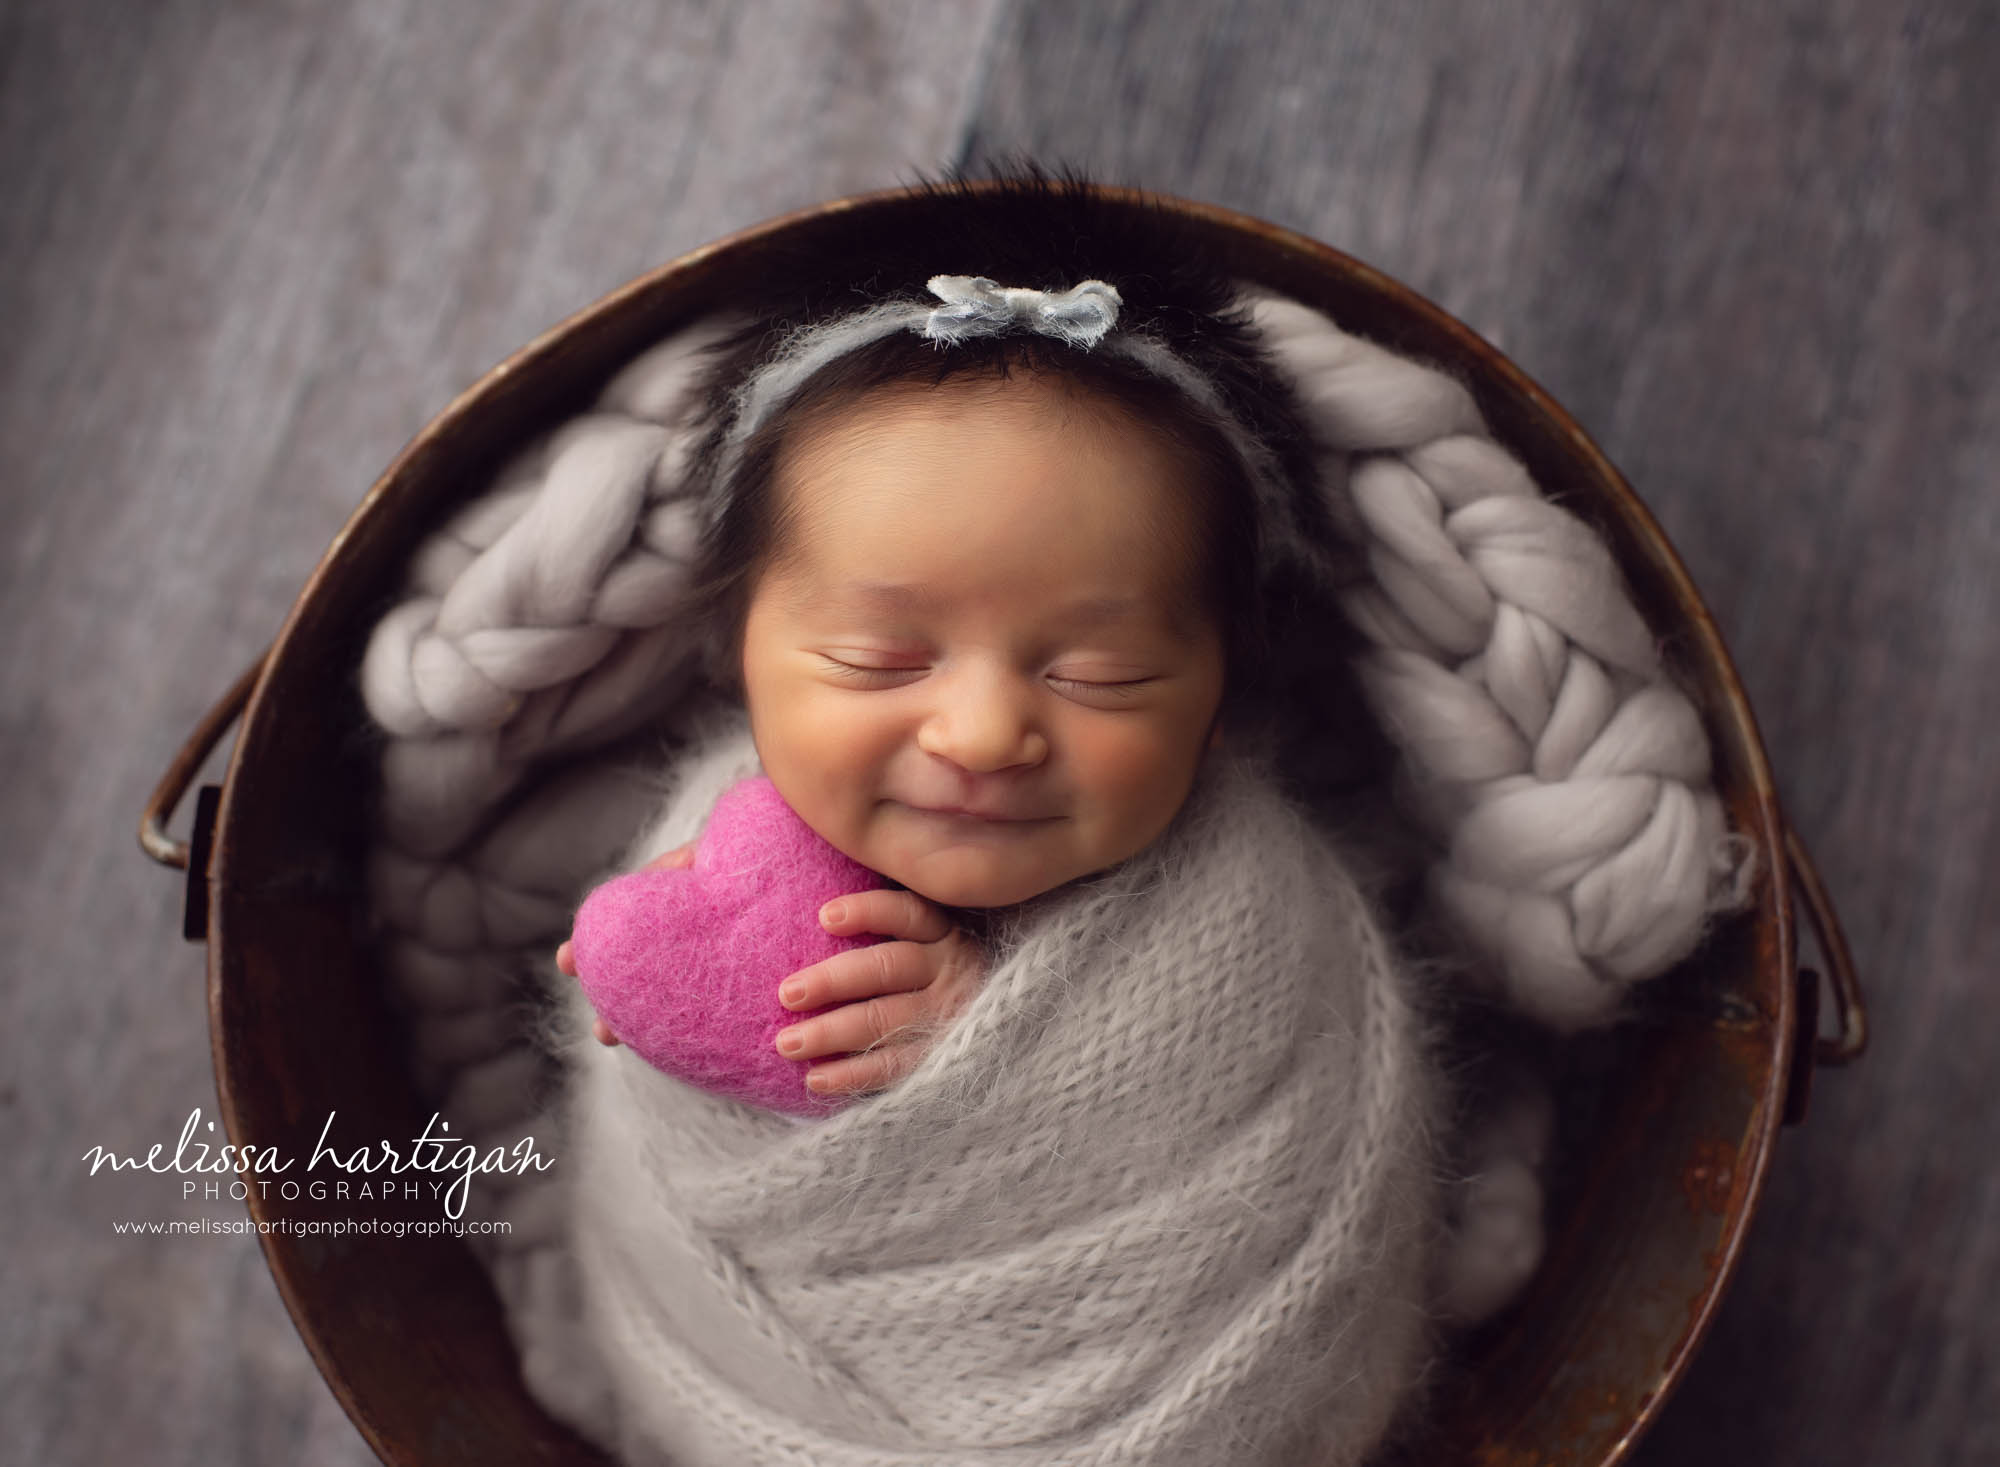 Baby girl in metal bucket wrapped up in grey knitted wrap with felted purple heart